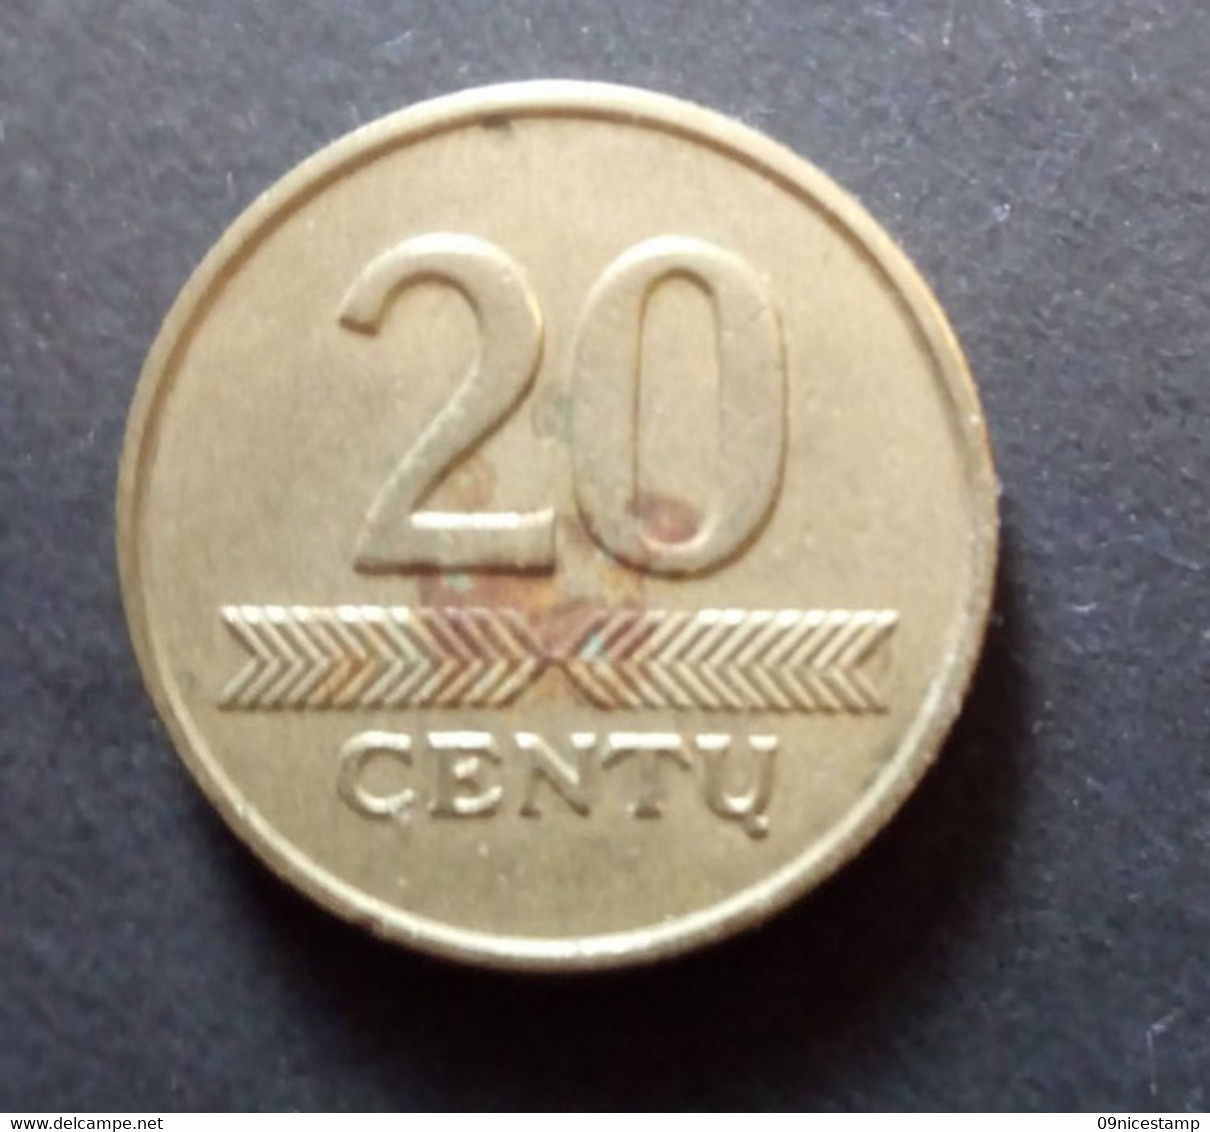 Lithuania, Year 2007, Used, - Lithuania